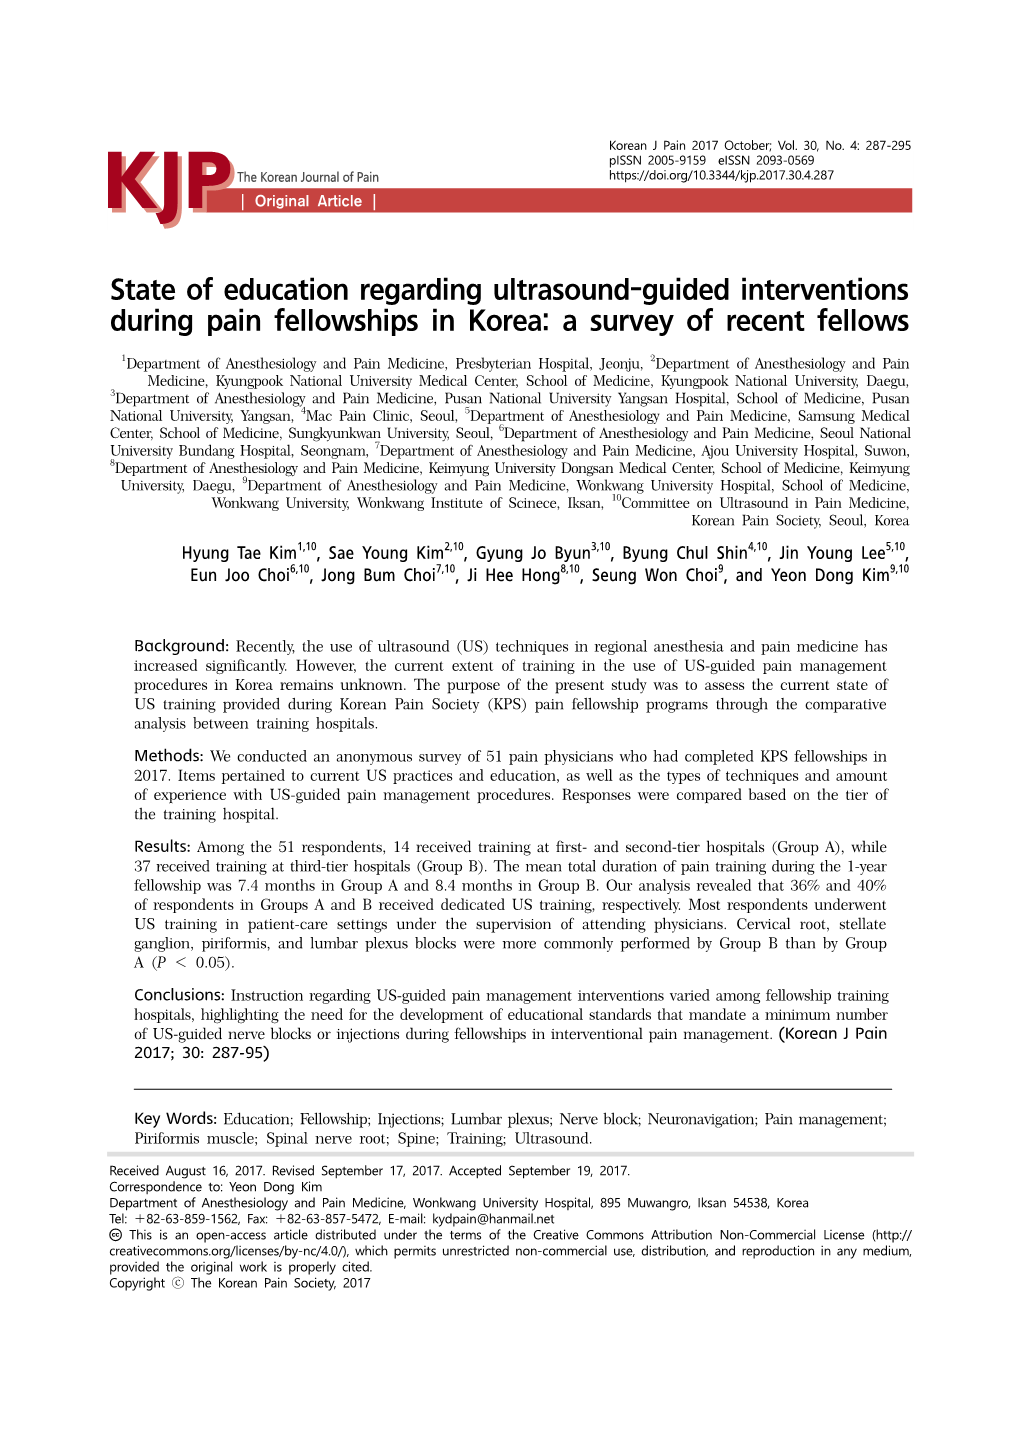 State of Education Regarding Ultrasound-Guided Interventions During Pain Fellowships in Korea: a Survey of Recent Fellows